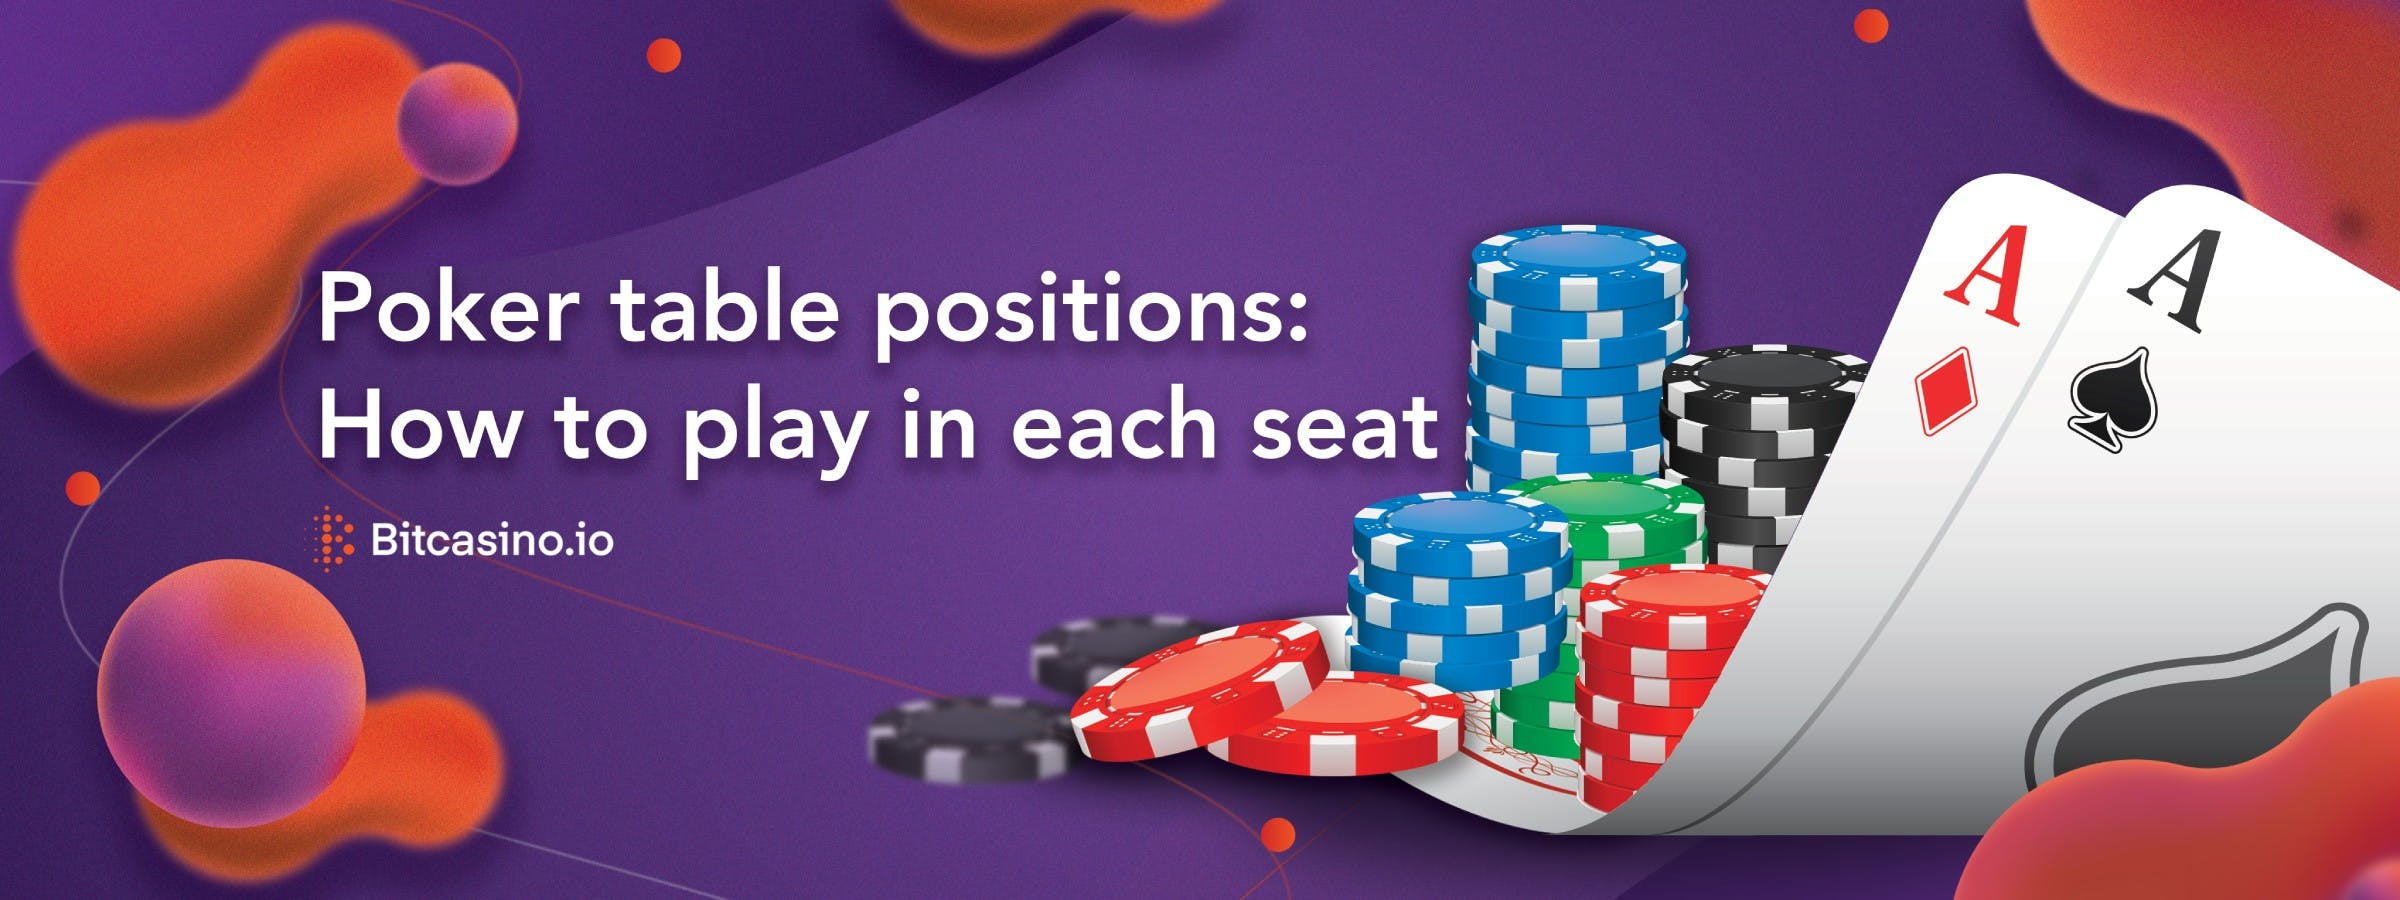 Poker table positions: How to play in each seat